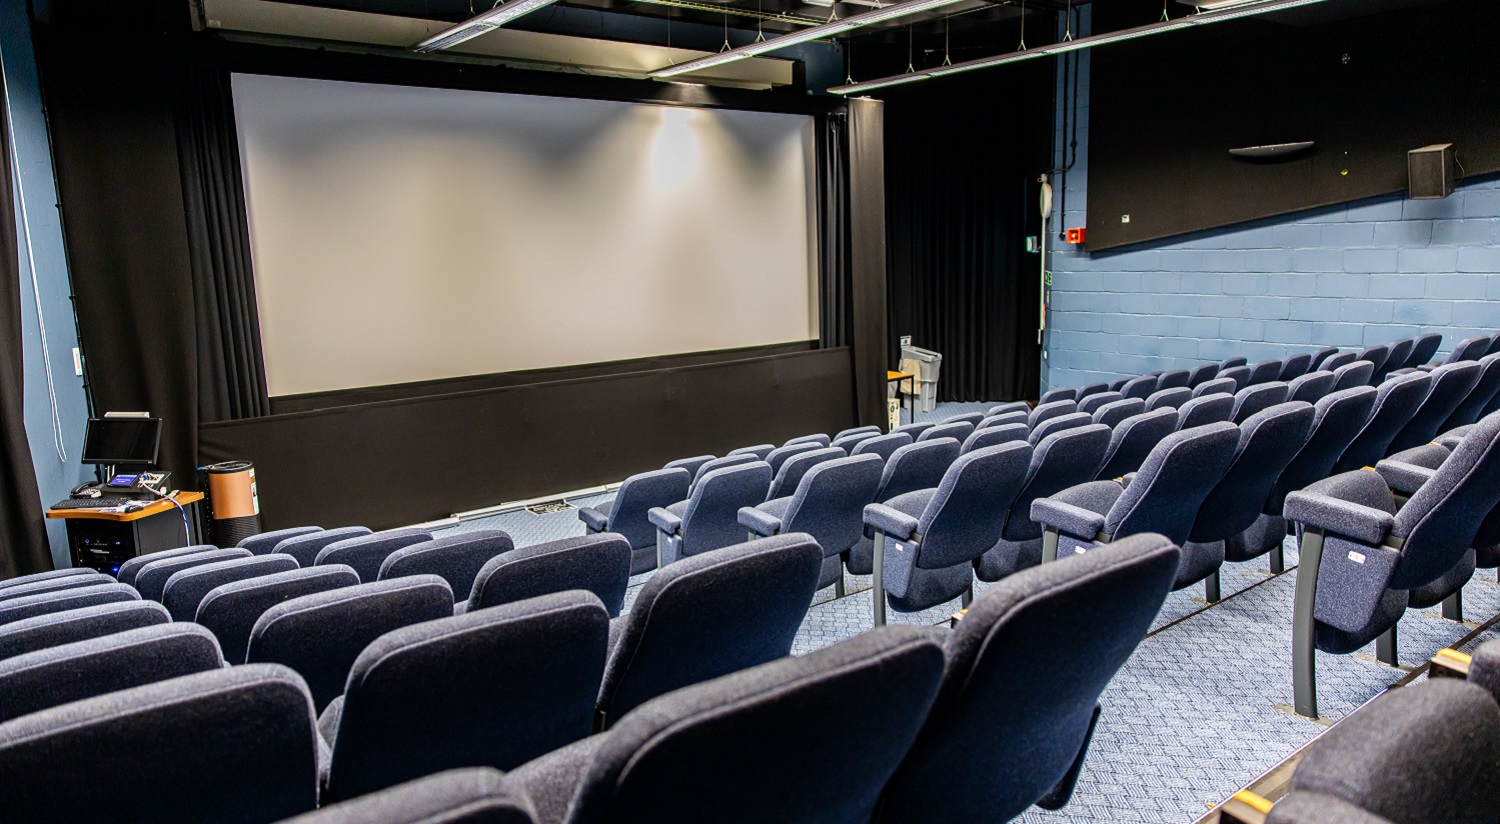 Colchester Cine 10 Cinema screen and seating